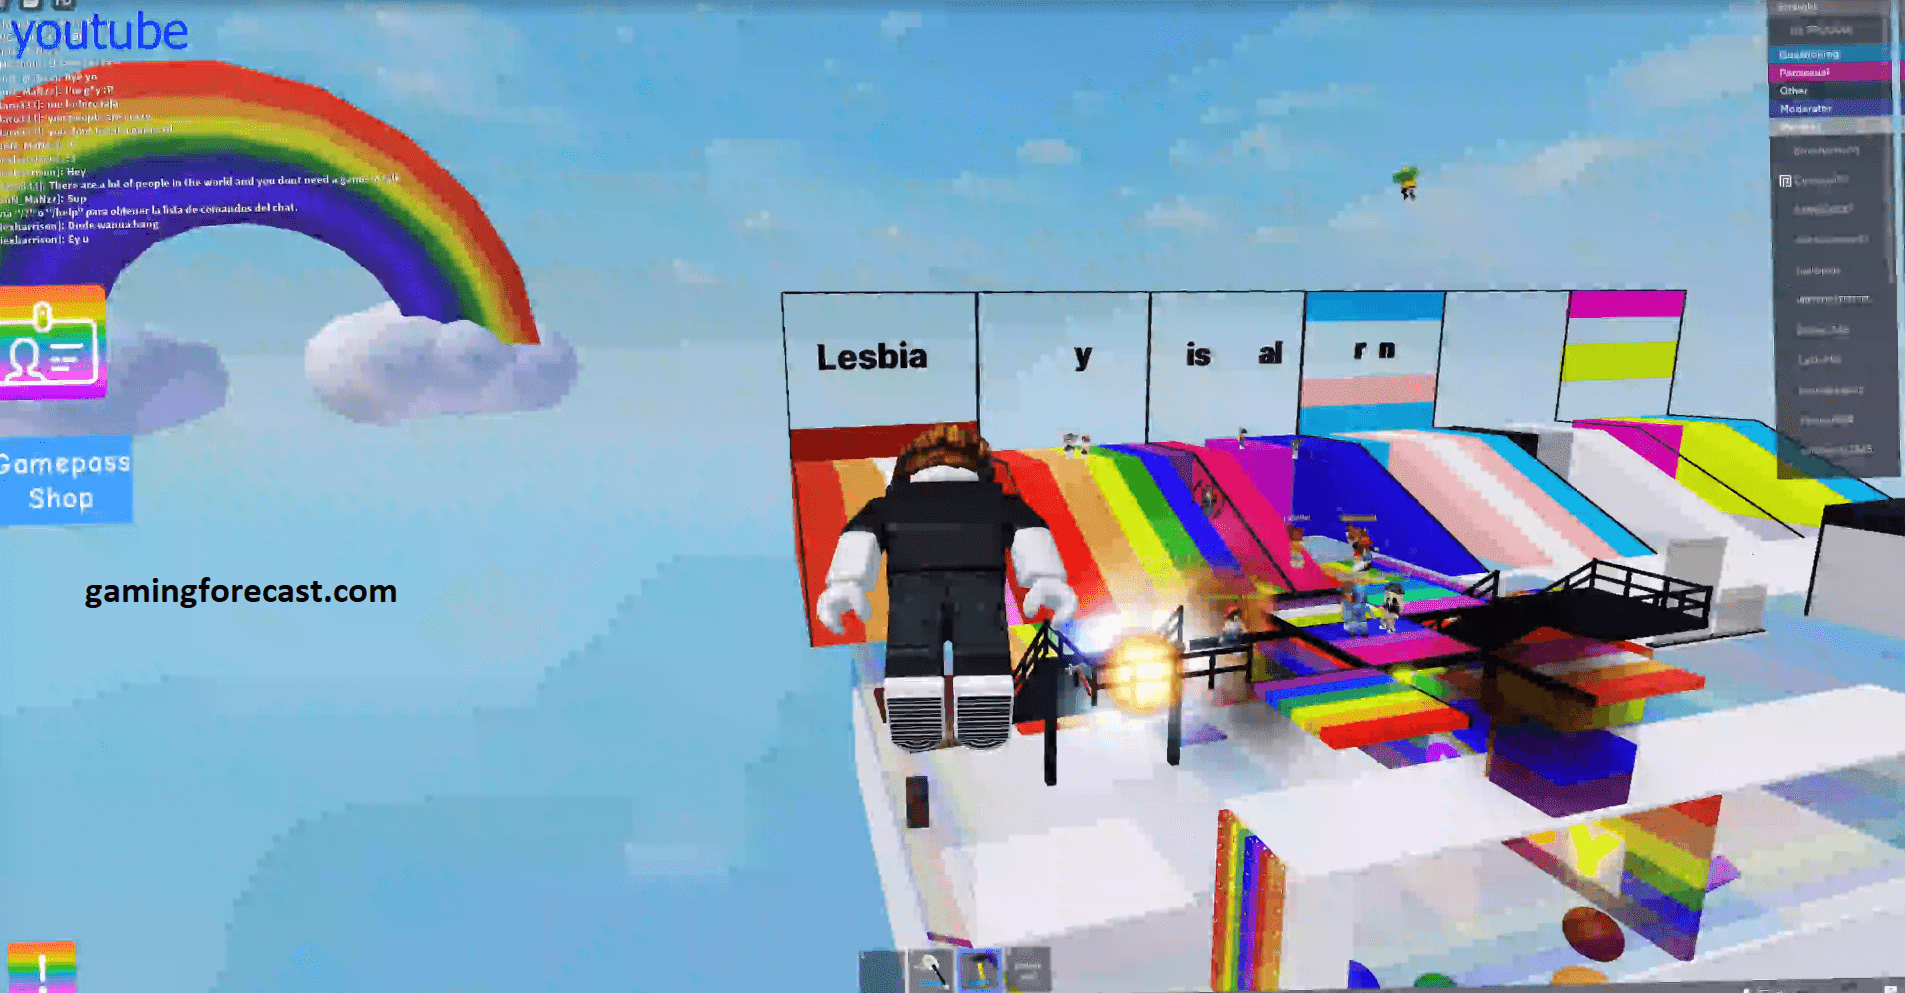 Roblox Hack Download Pc Destroy Lobby Fly Aimbot Scripts 2021 Gaming Forecast Download Free Online Game Hacks - roblox hack without downloading anything